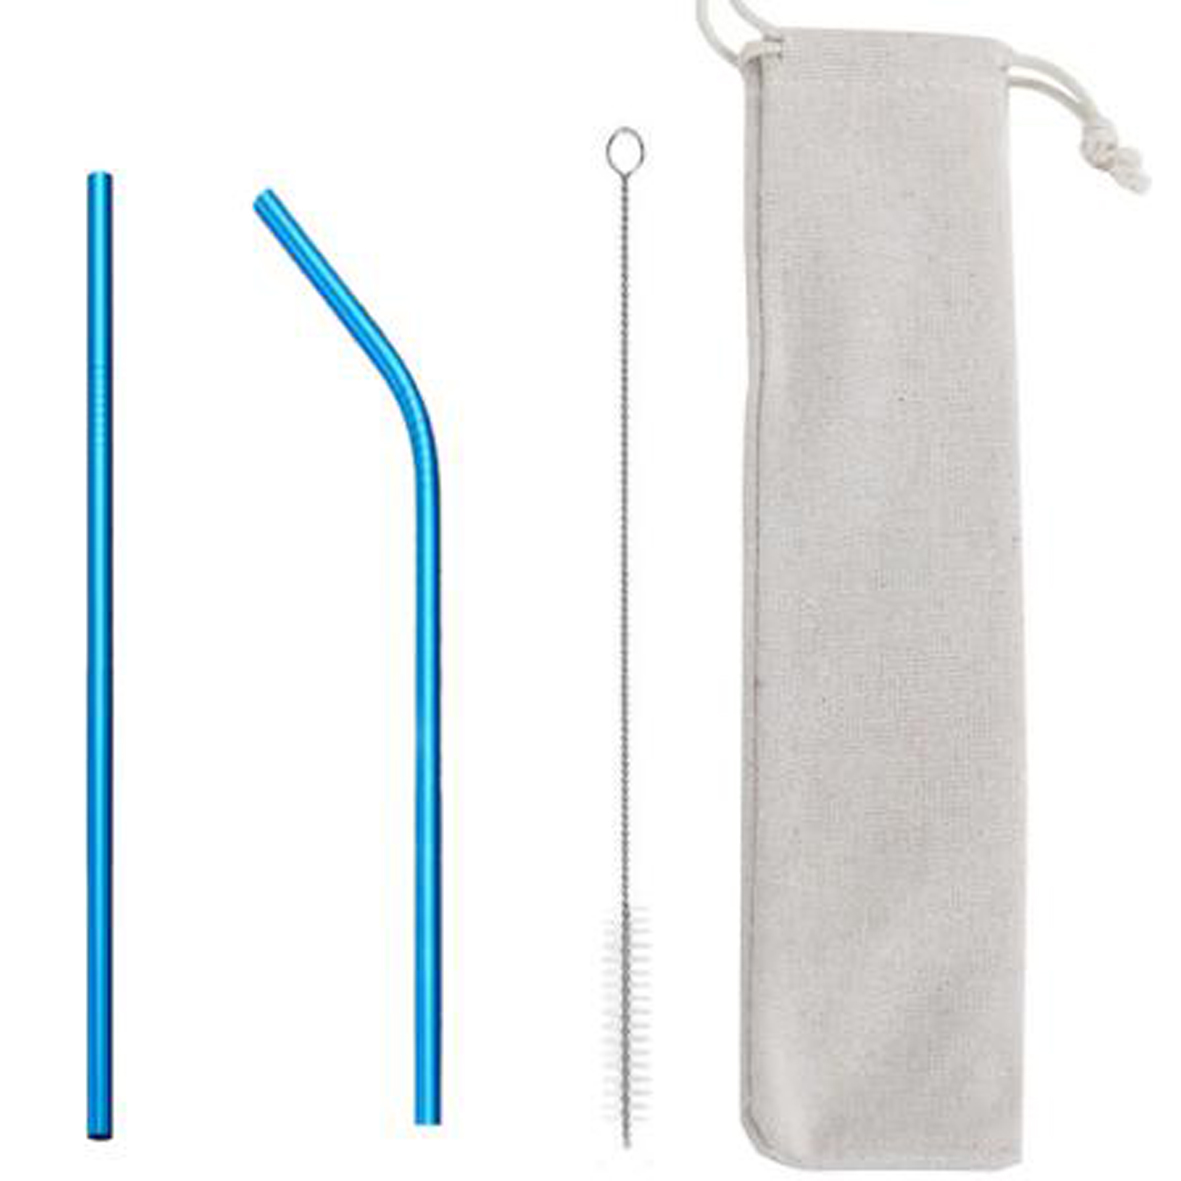 GL-ELY1259 3 in 1 Blue Stainless Steel Straw Set